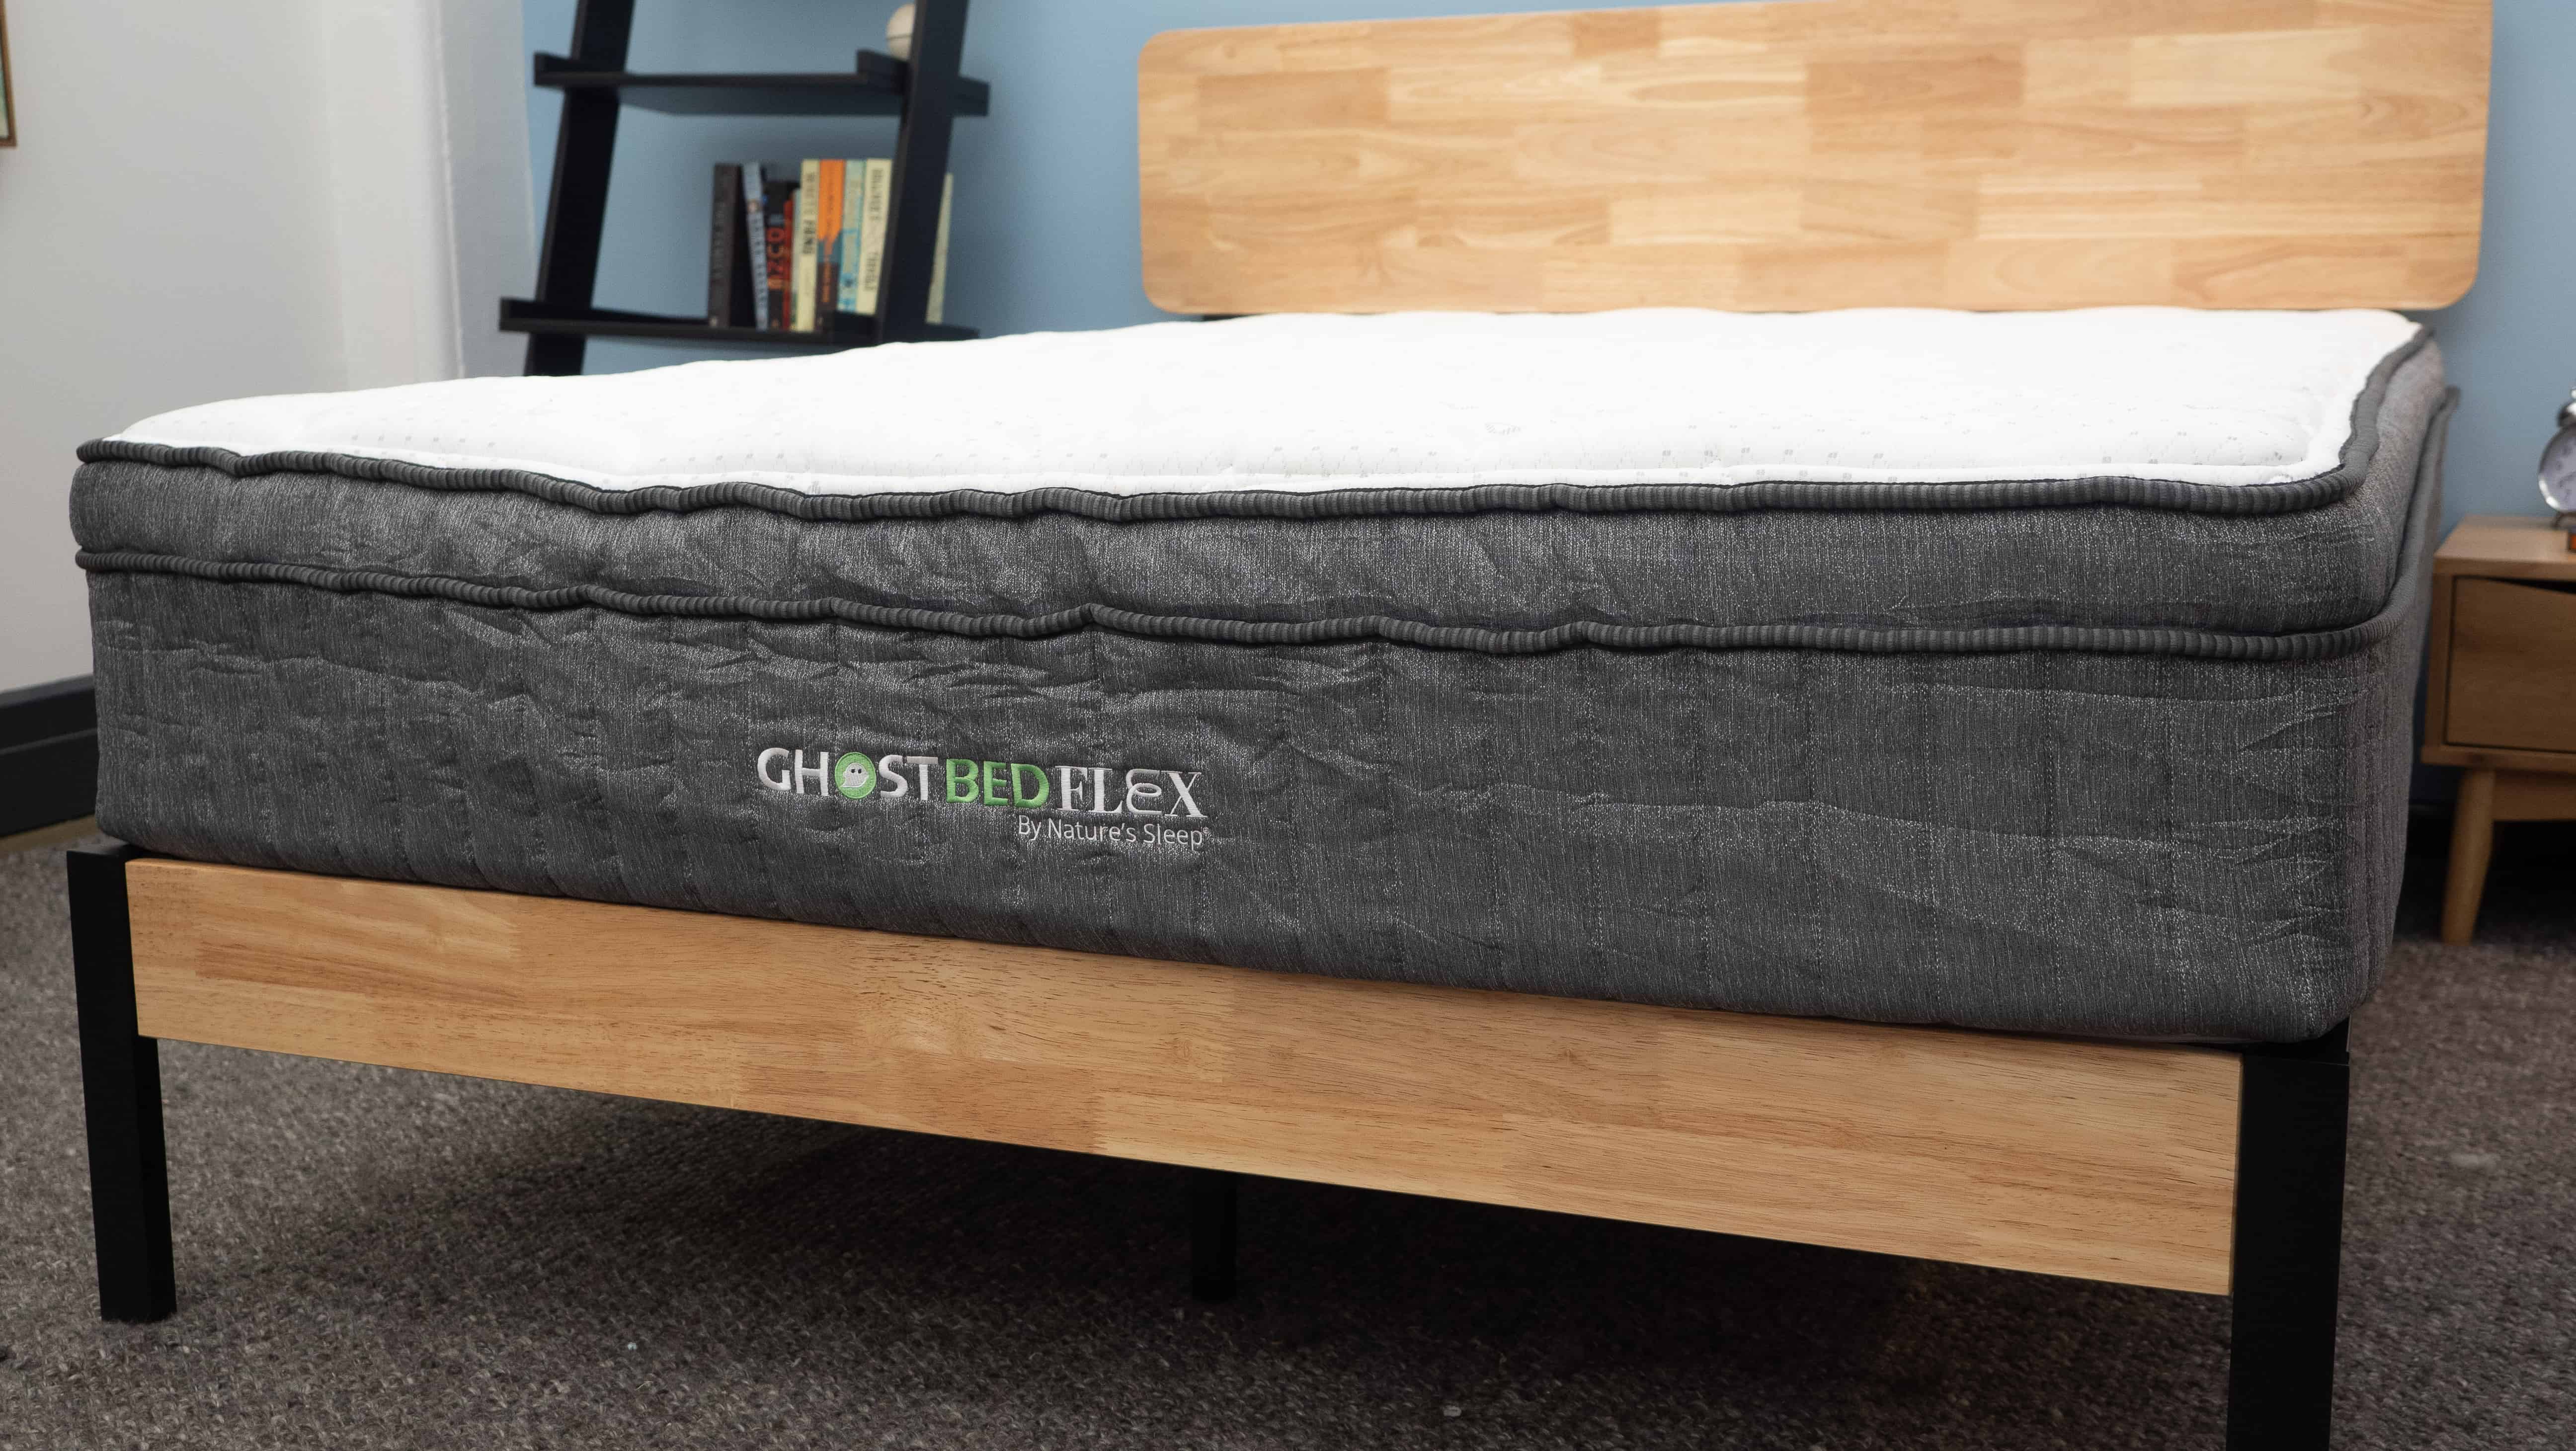 best bed for side sleepers with lower back pain